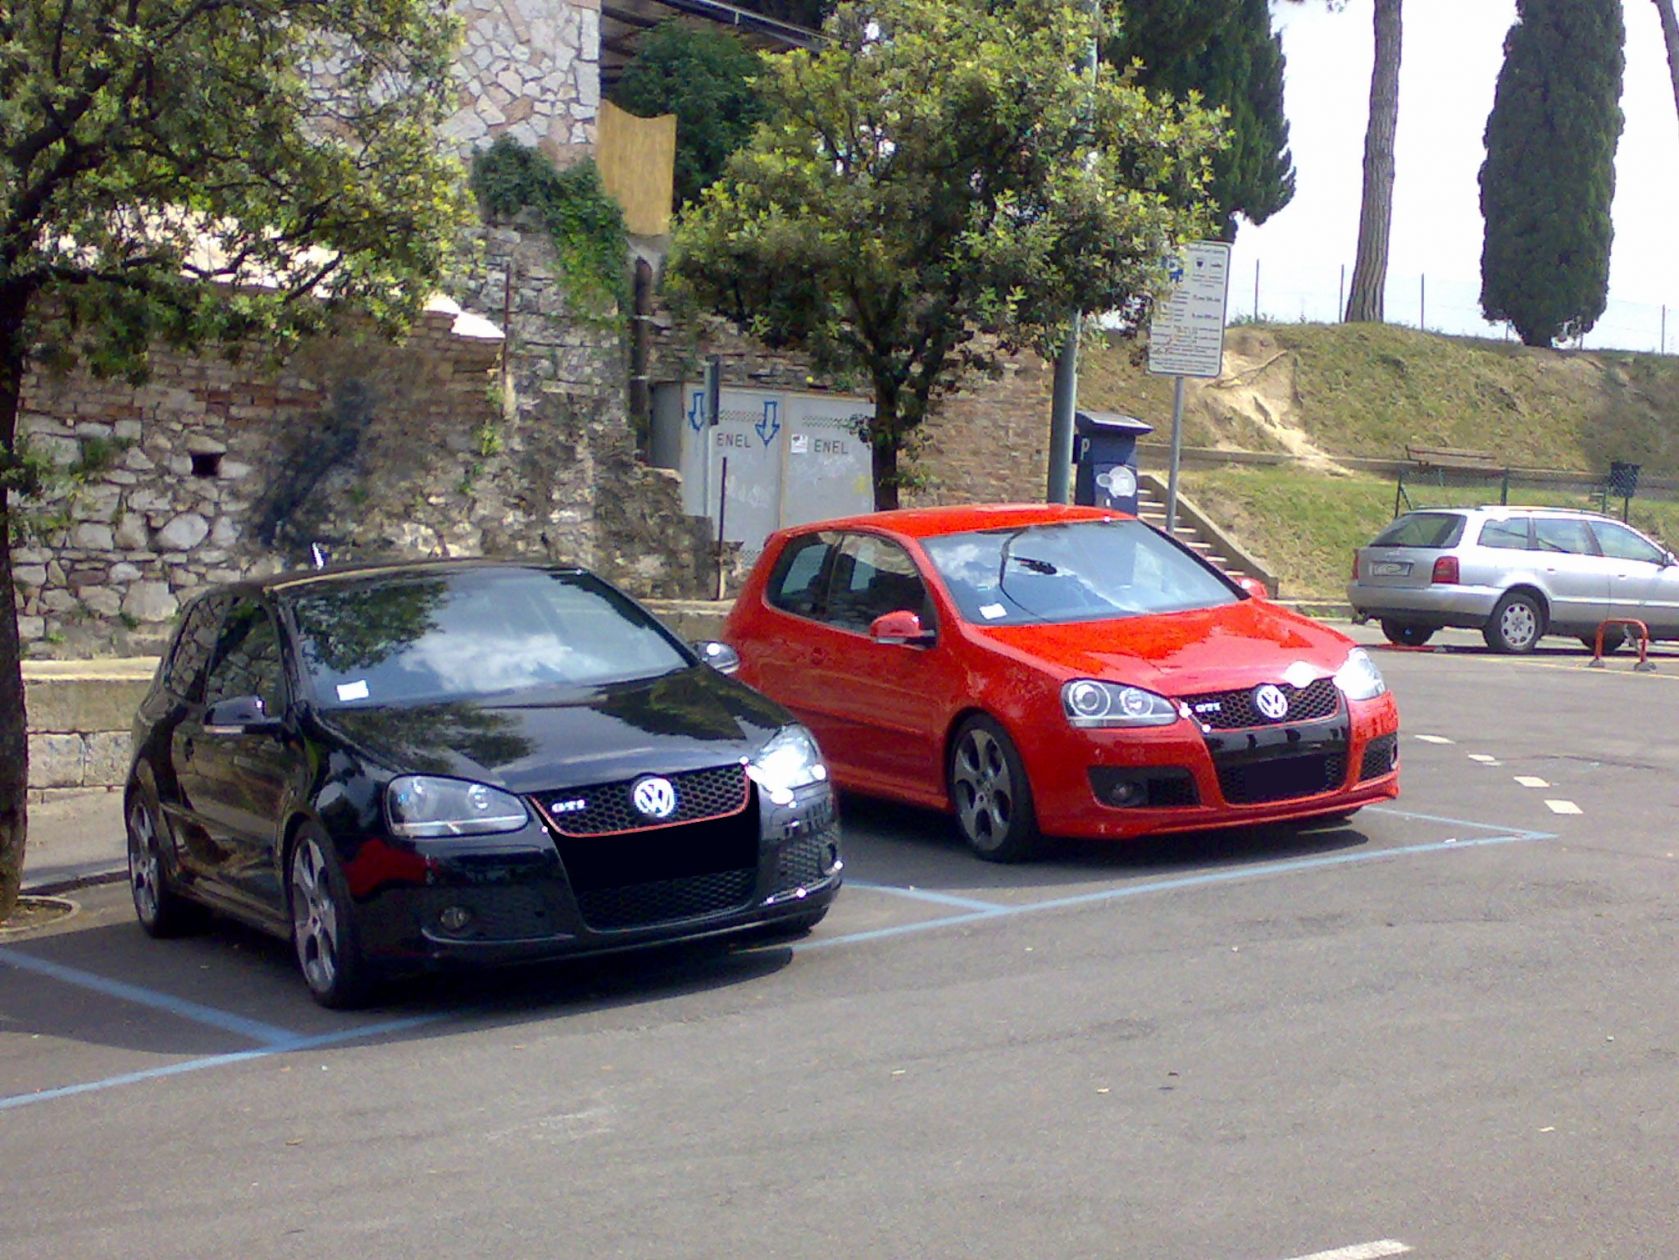 FEDE's & ANDRE's GTI
